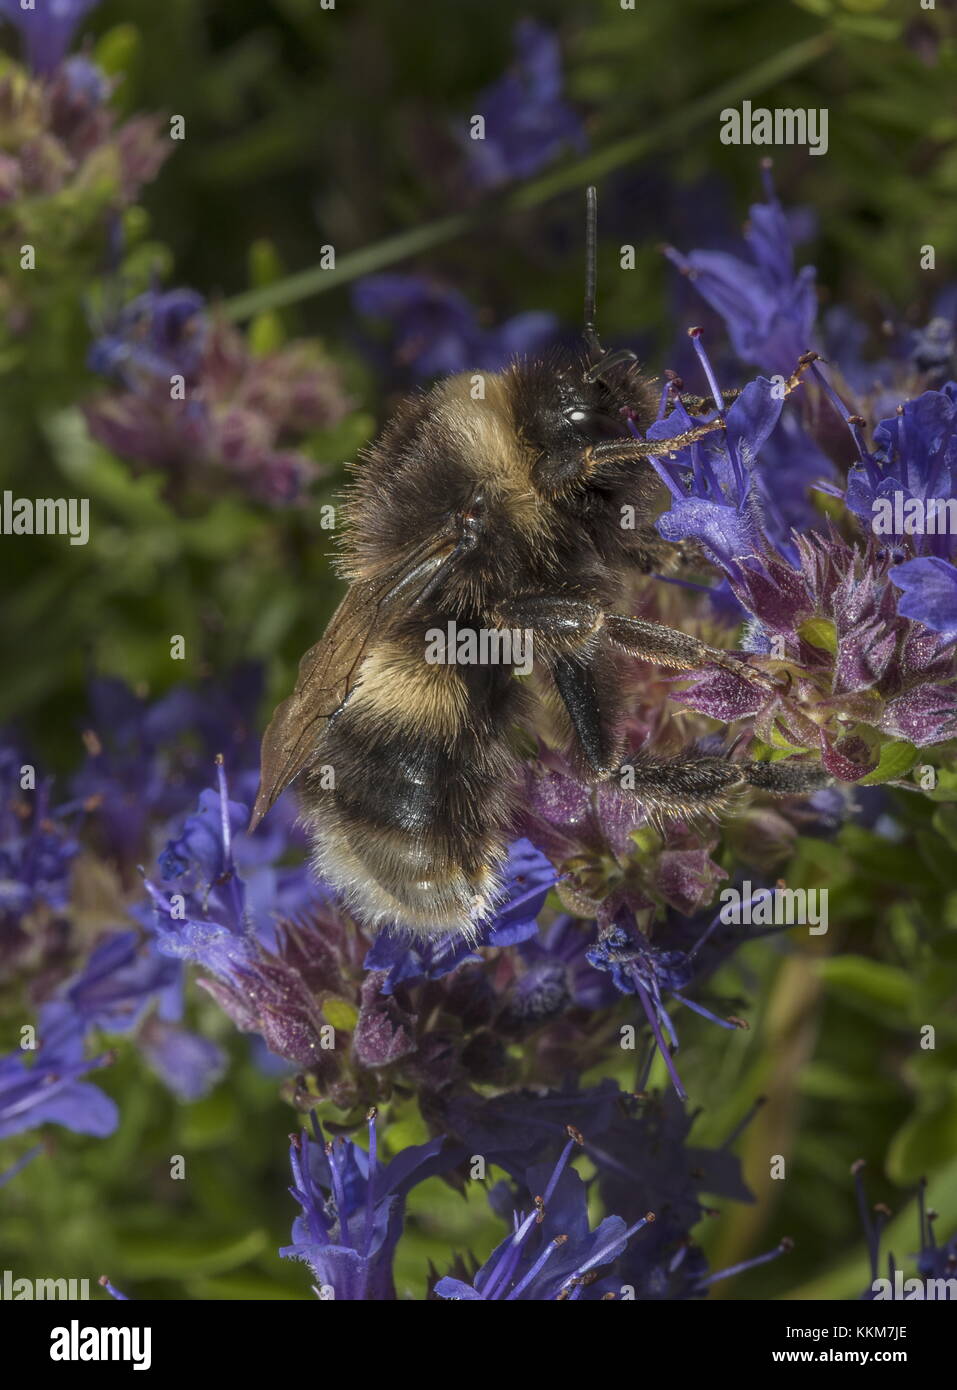 Worker Buff-tailed bumble-bee, Bombus terrestris,  on Hyssop flowers in herb garden. Stock Photo